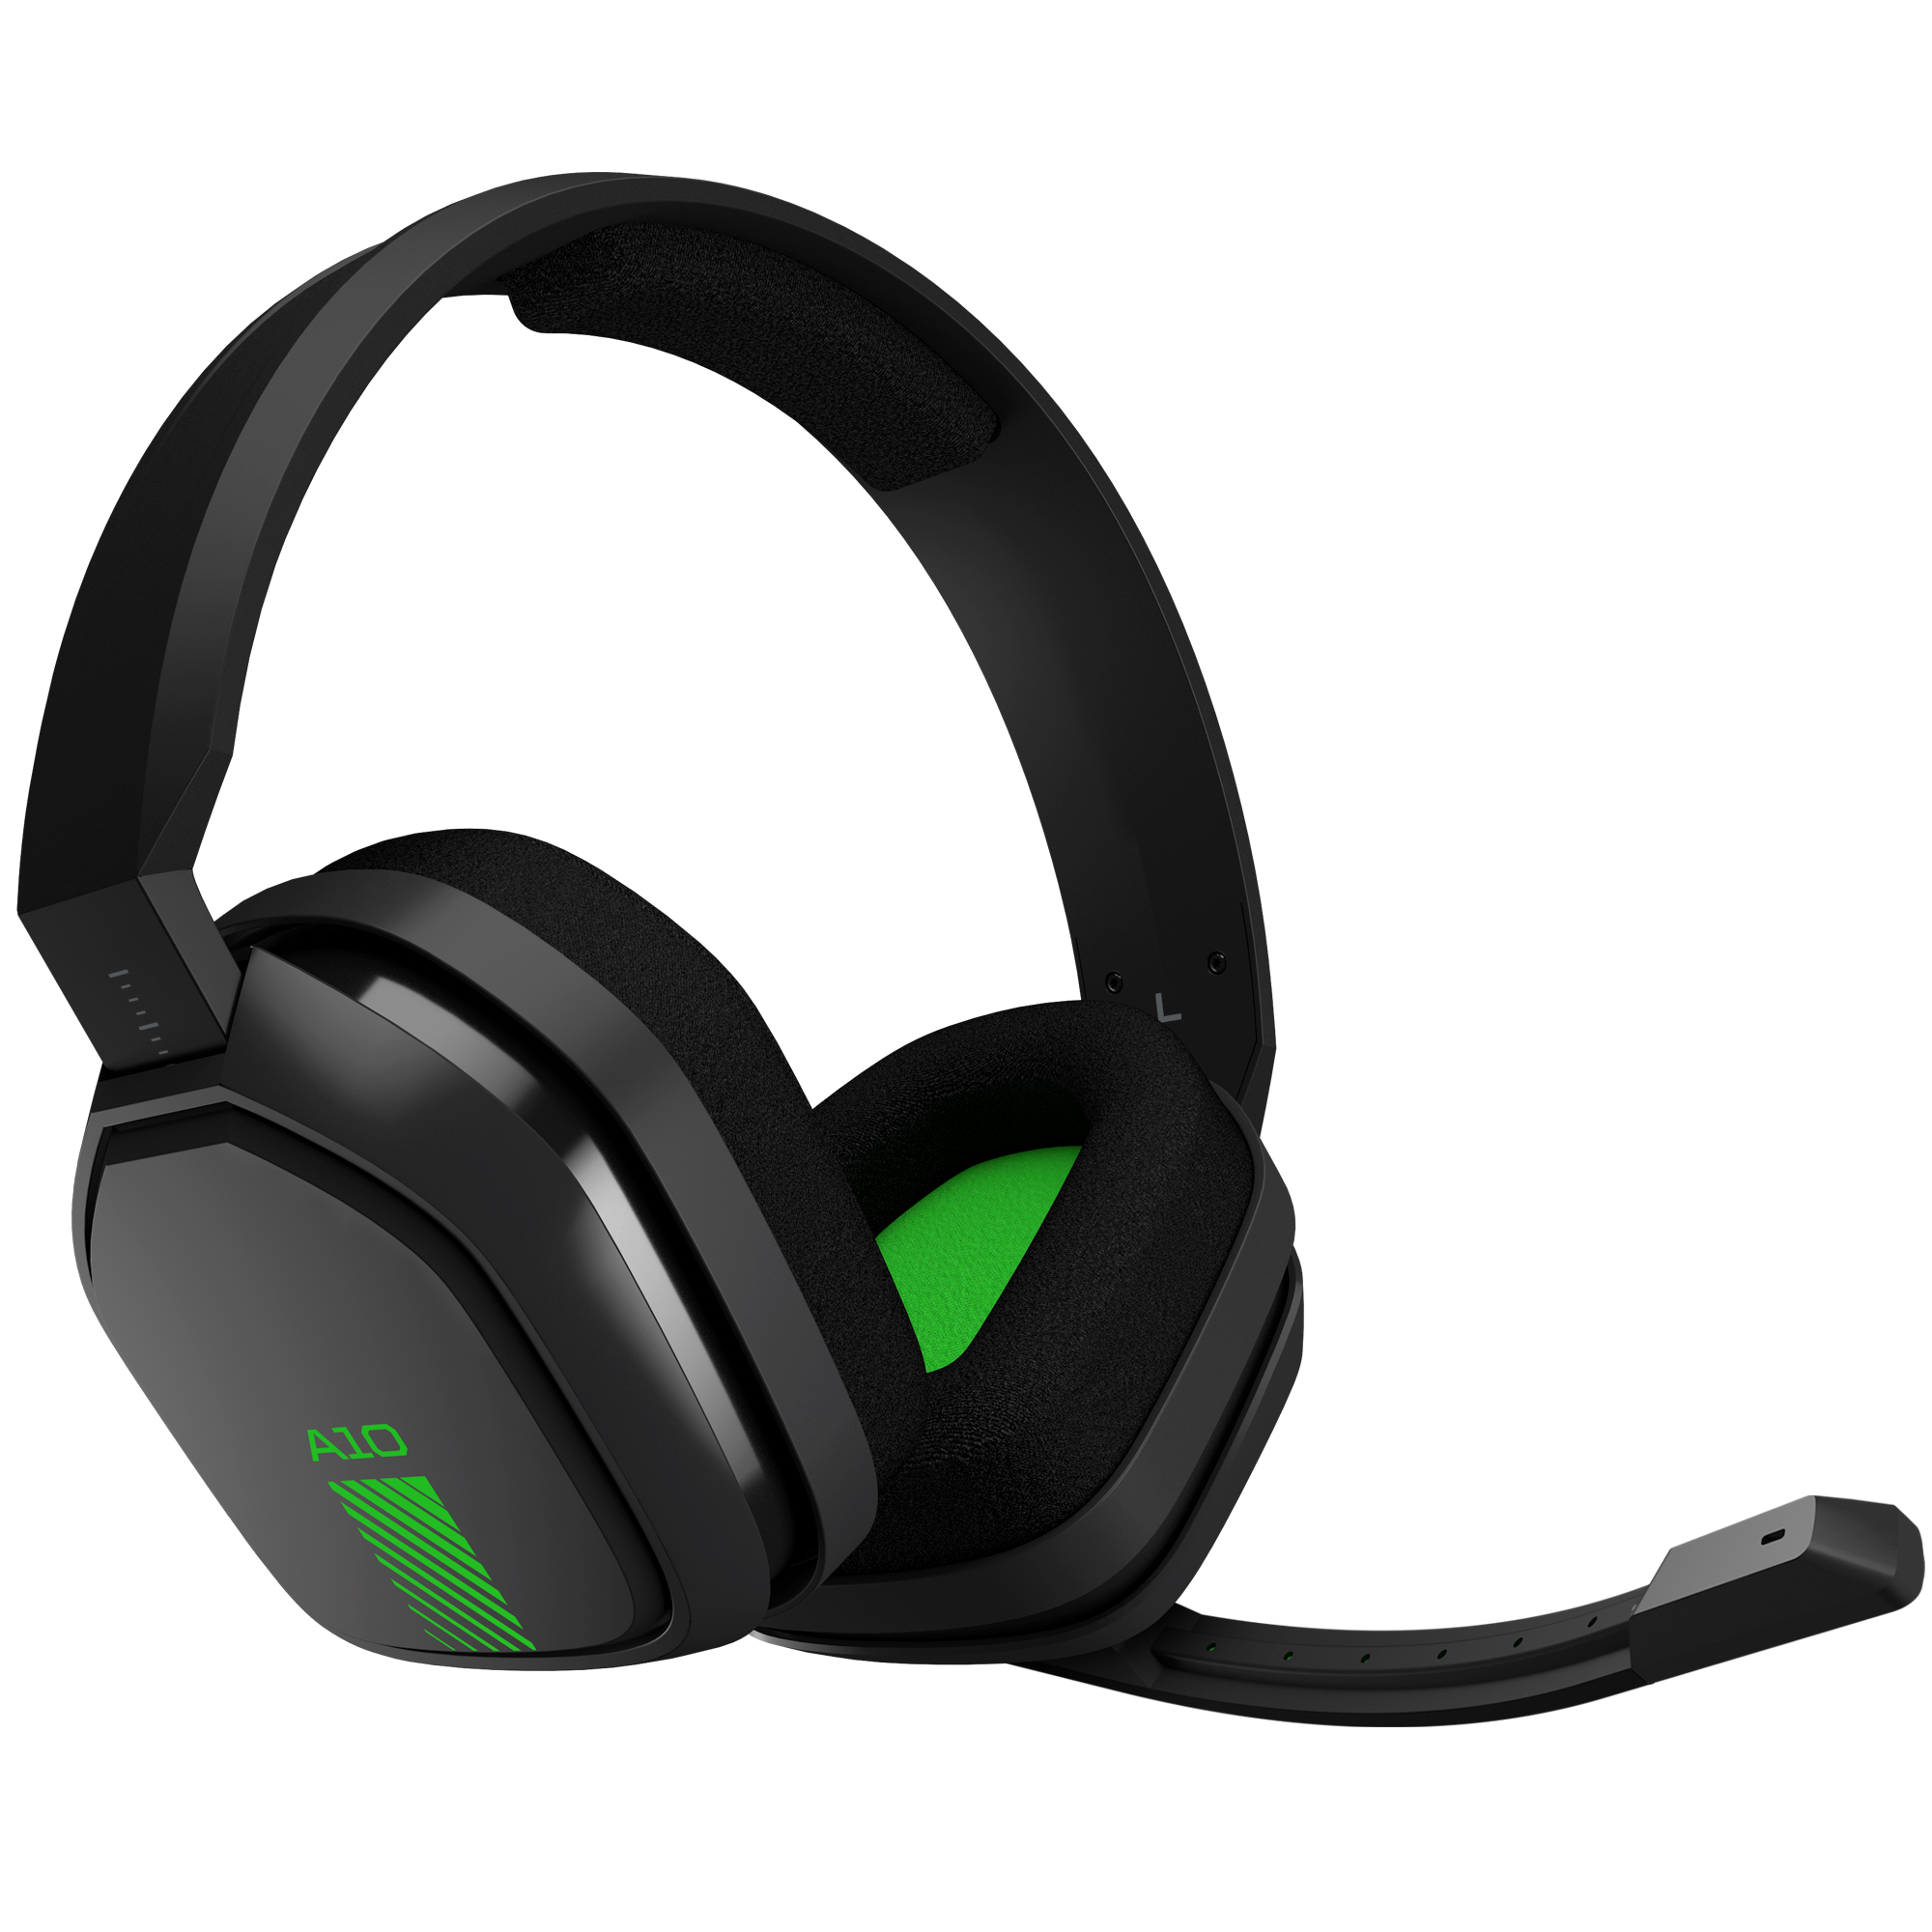 a10 xbox one headset